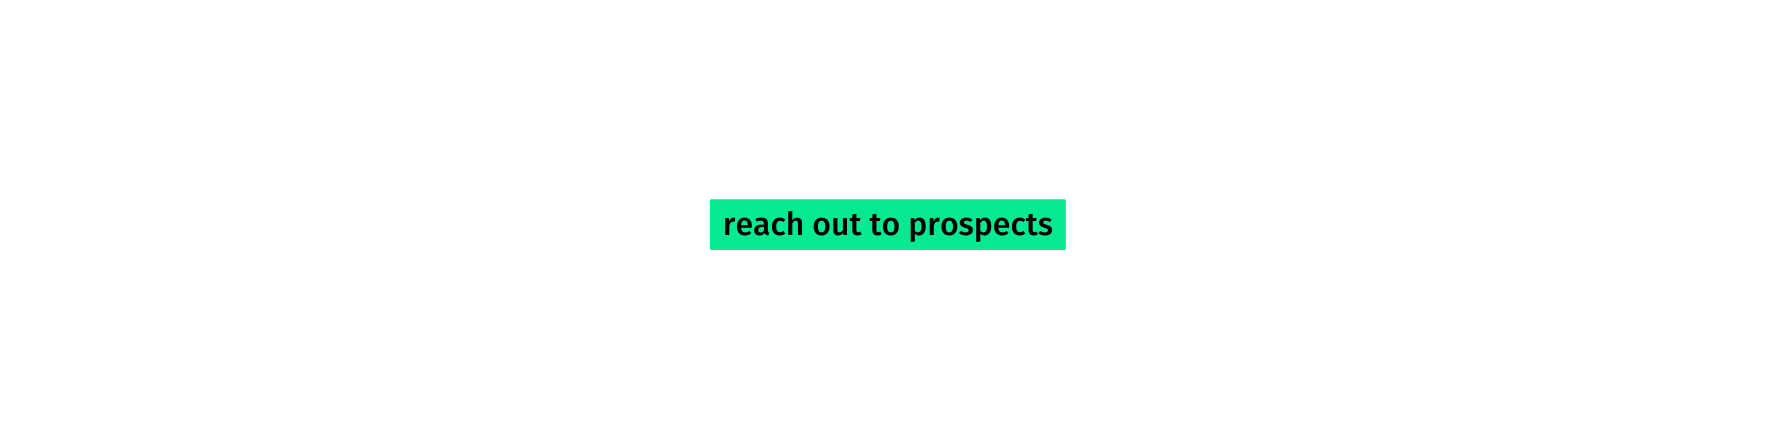 reach out to prospects